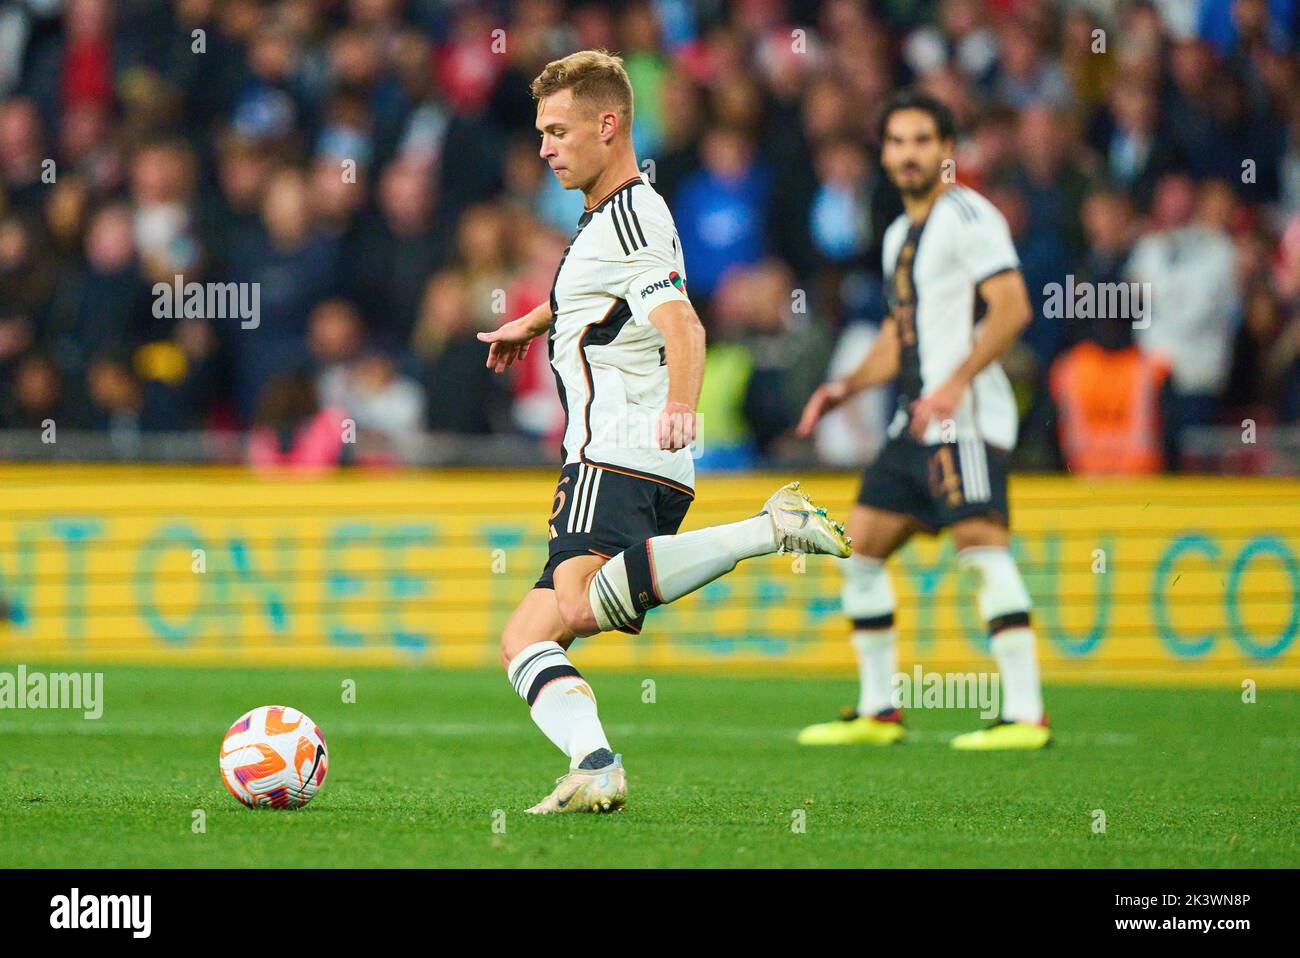 Joshua Kimmich, DFB 6  in the UEFA Nations League 2022 match  ENGLAND - GERMANY 3-3  in Season 2022/2023 on Sept 26, 2022  in London, Great Britain.  © Peter Schatz / Alamy Live News Stock Photo